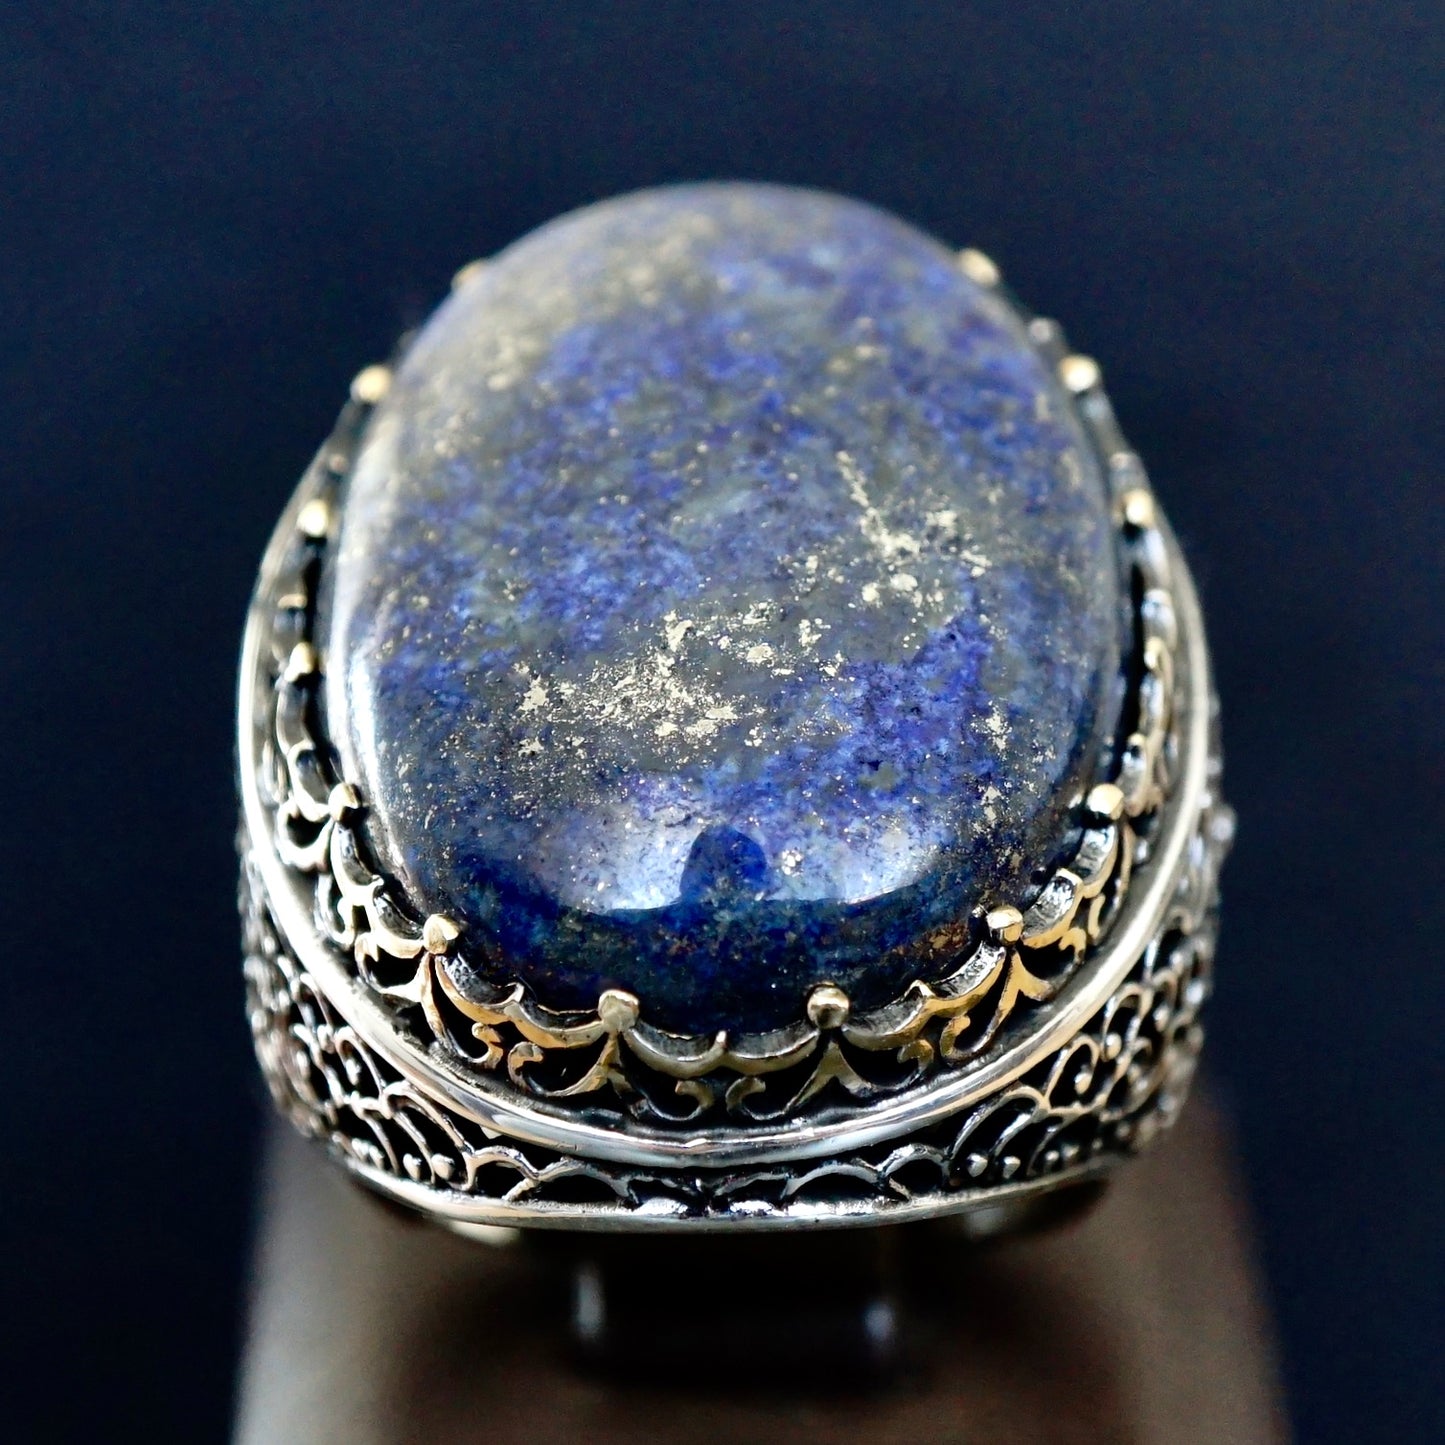 Lapis Lazuli Ring 925 Sterling Silver natural Gemstone Handcrafted Artisan Jewelry